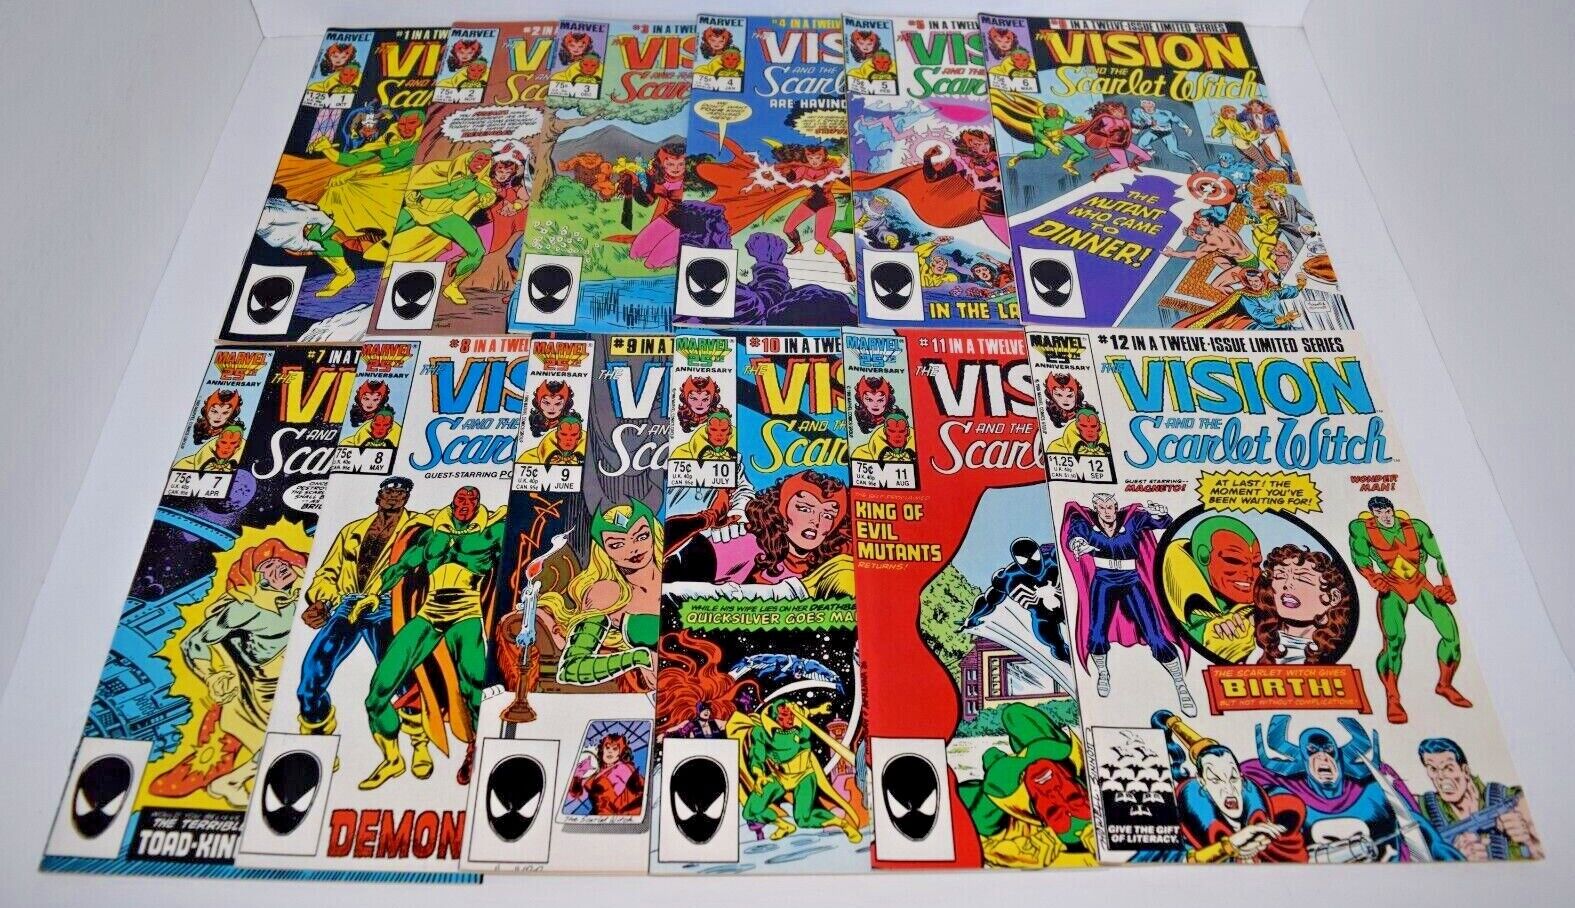 VISION AND THE SCARLET WITCH (1985) 12 ISSUE COMPLETE SET 1-12 MARVEL COMICS